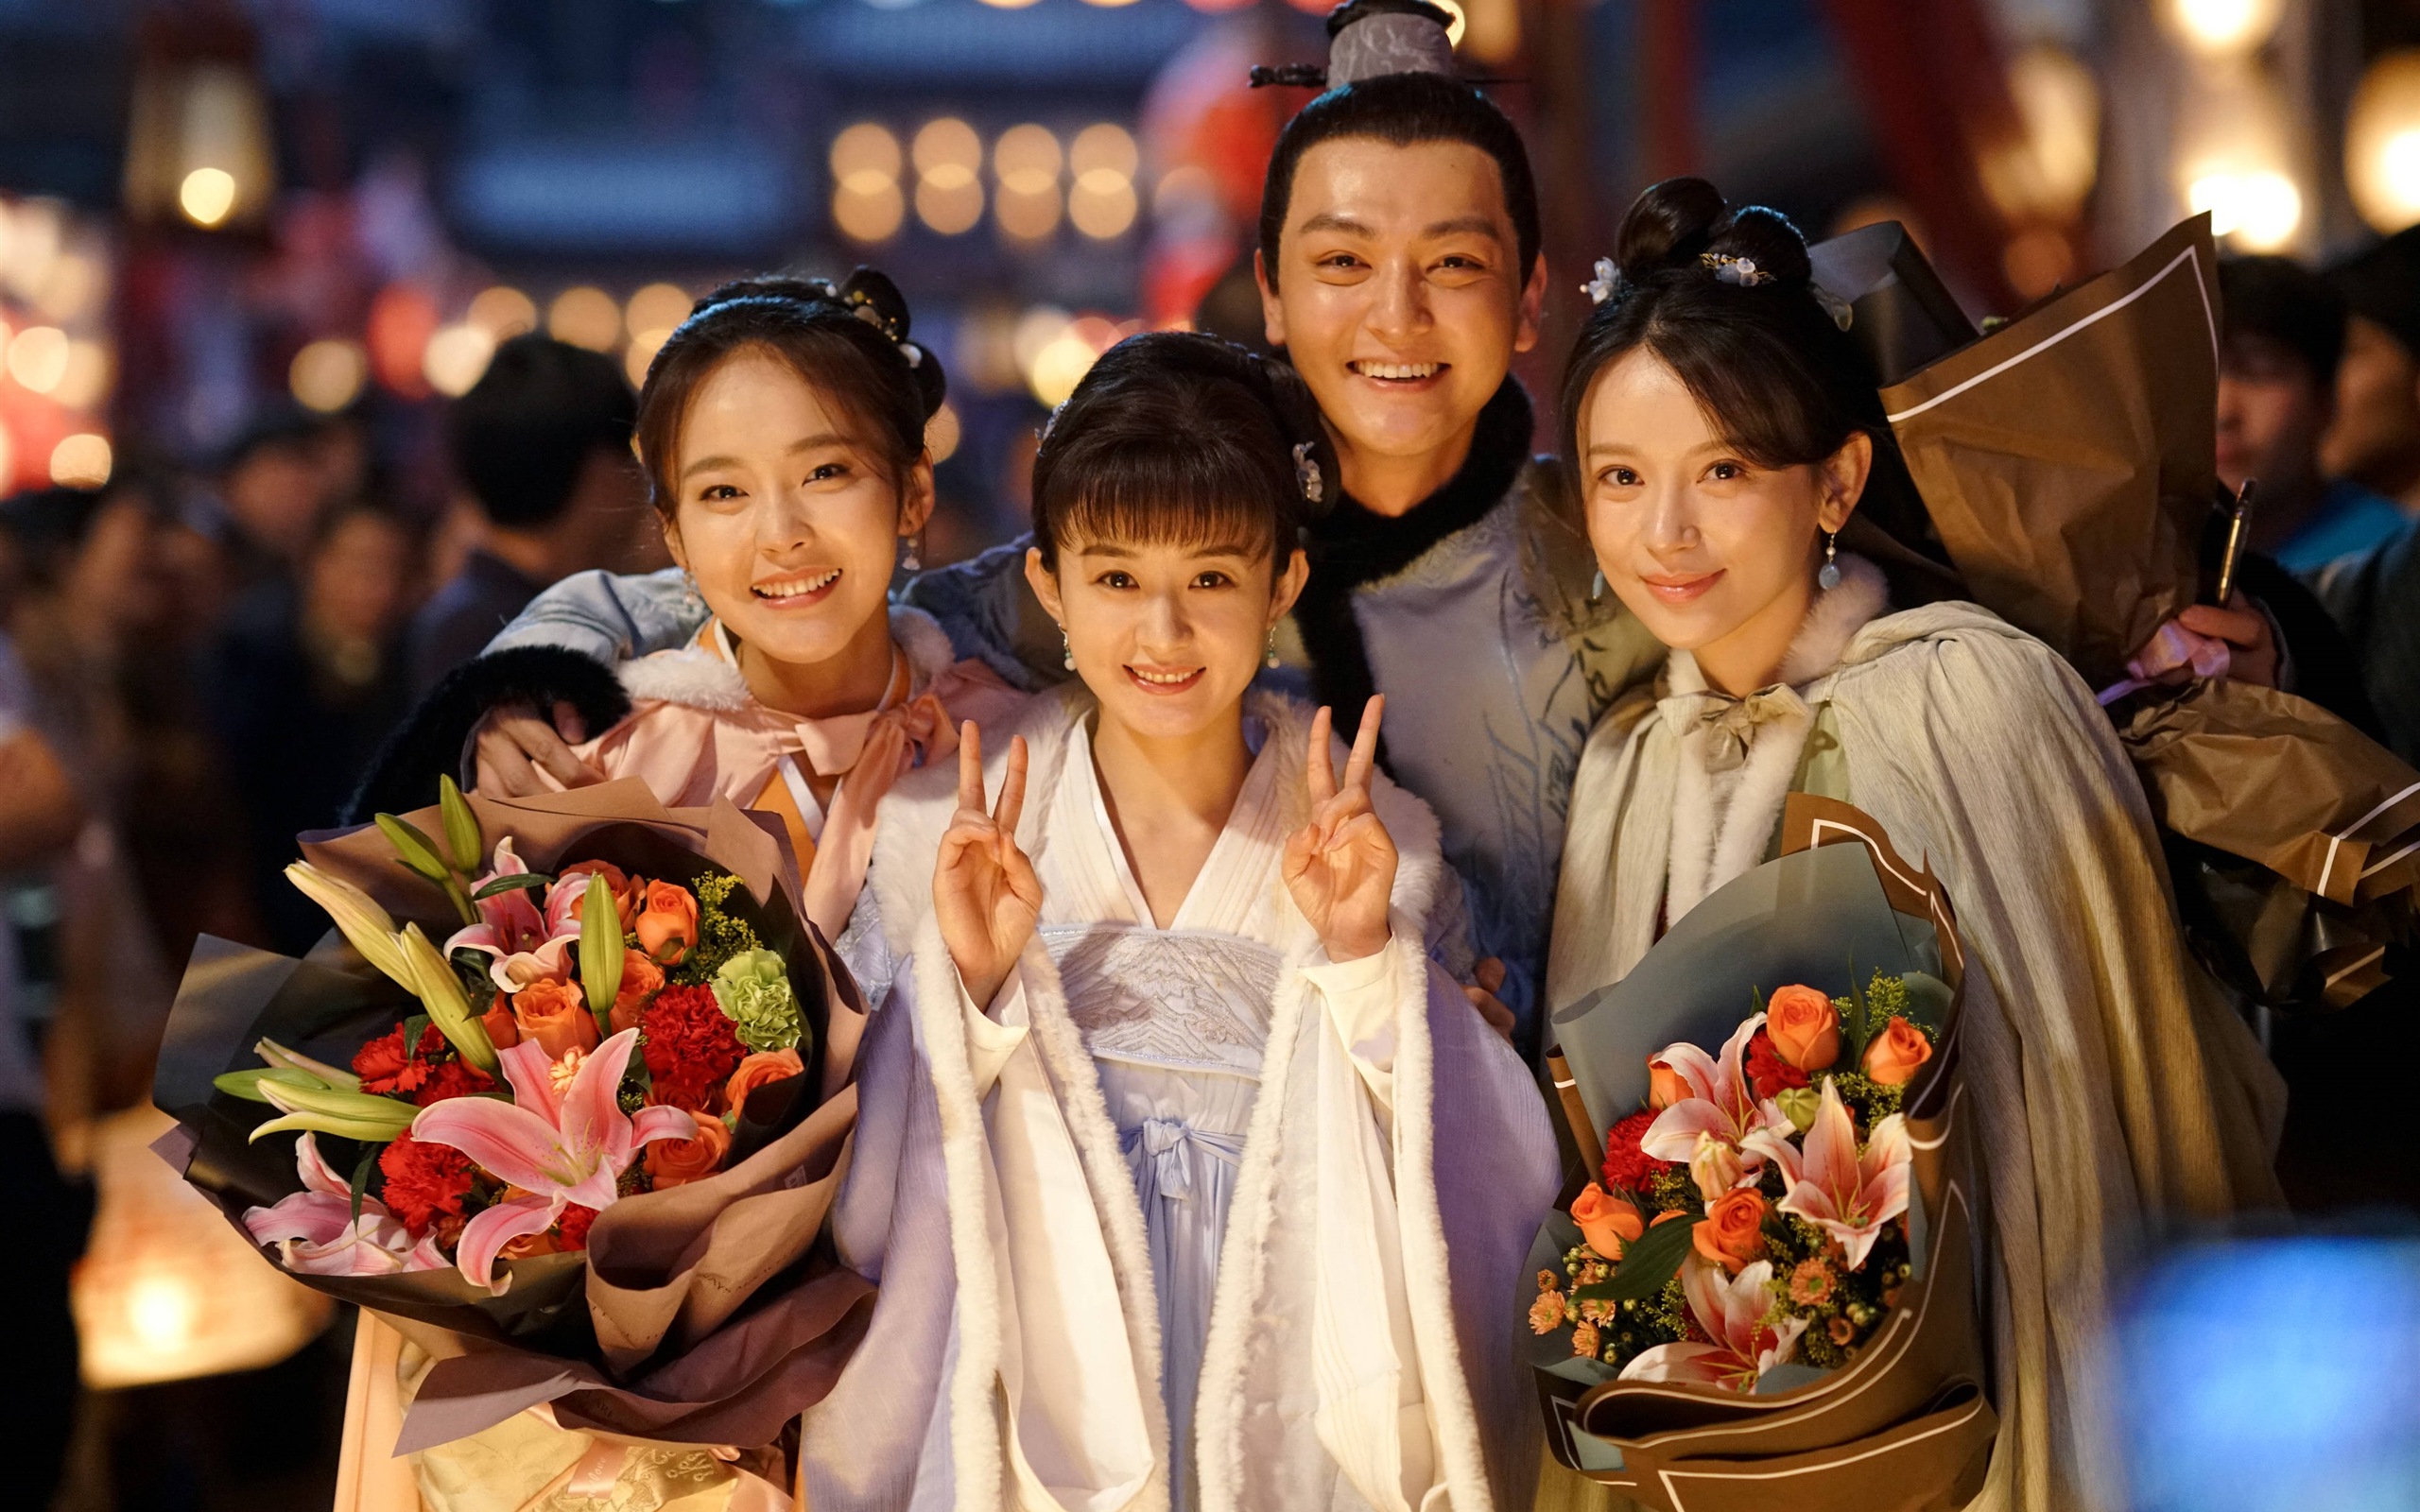 The Story Of MingLan, TV series HD wallpapers #48 - 2560x1600